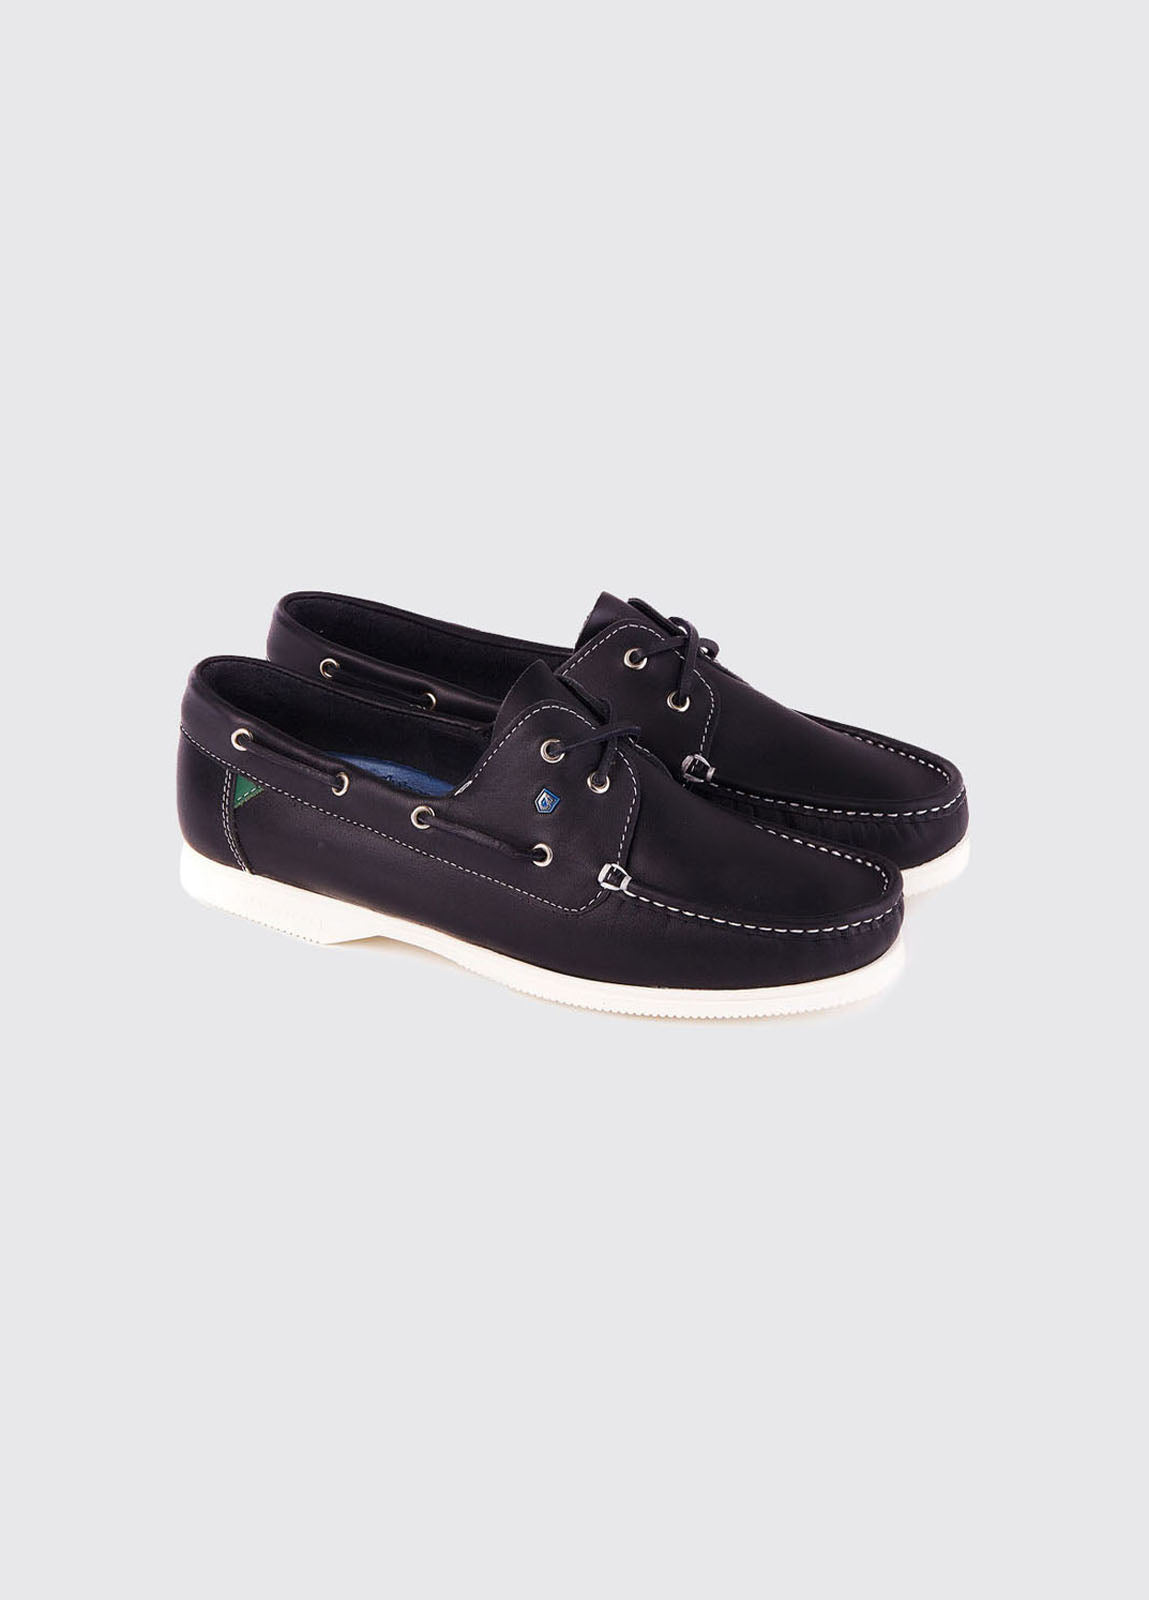 Dubarry Deck shoes for School in Navy